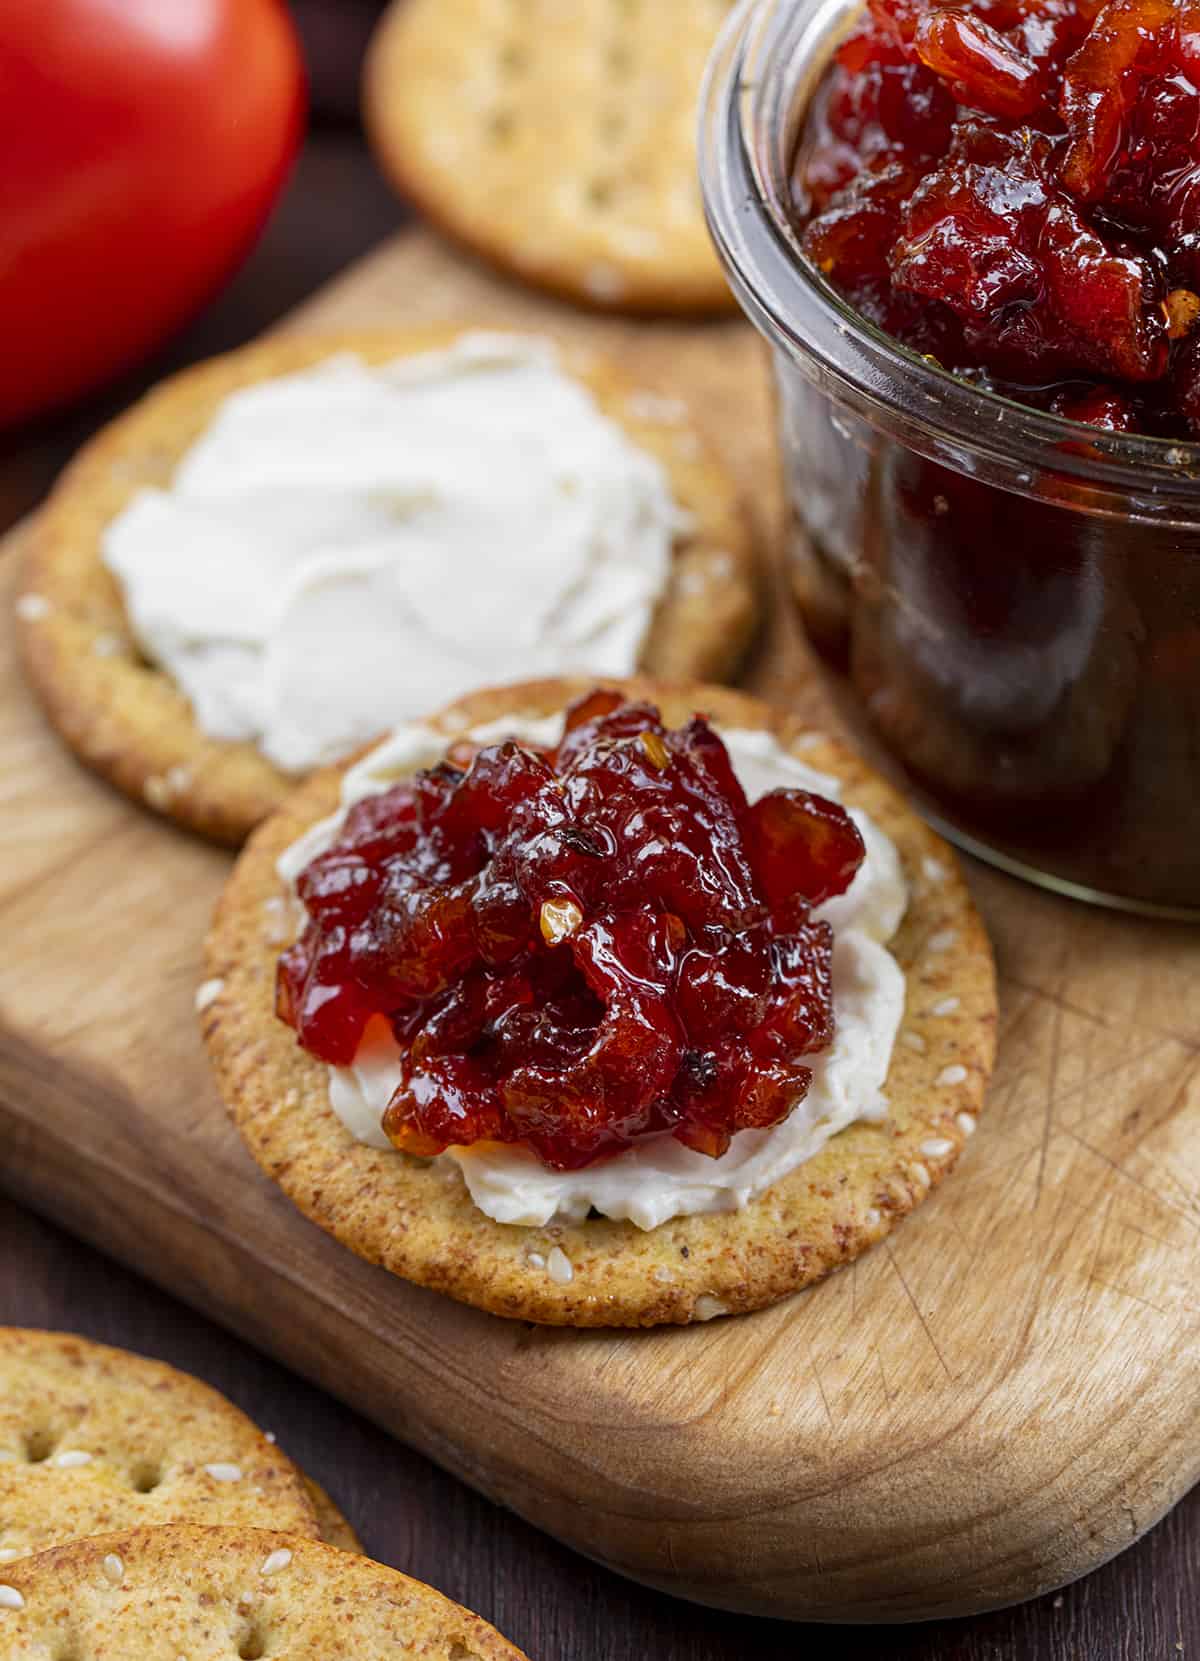 Cracker with Cream Cheese and Spicy Tomato Jam Spread on Top. Appetizer, Burger Topping Idea, Tomato Jam, How to Make Tomato Jam, Spicy Jam, Homemade Tomato Jam, How to Can Tomato Jam, Cracker Spreads, Super Bowl Food, Christmas Appetizers, Thanksgiving Appetizers, i am homesteader, iamhomesteader